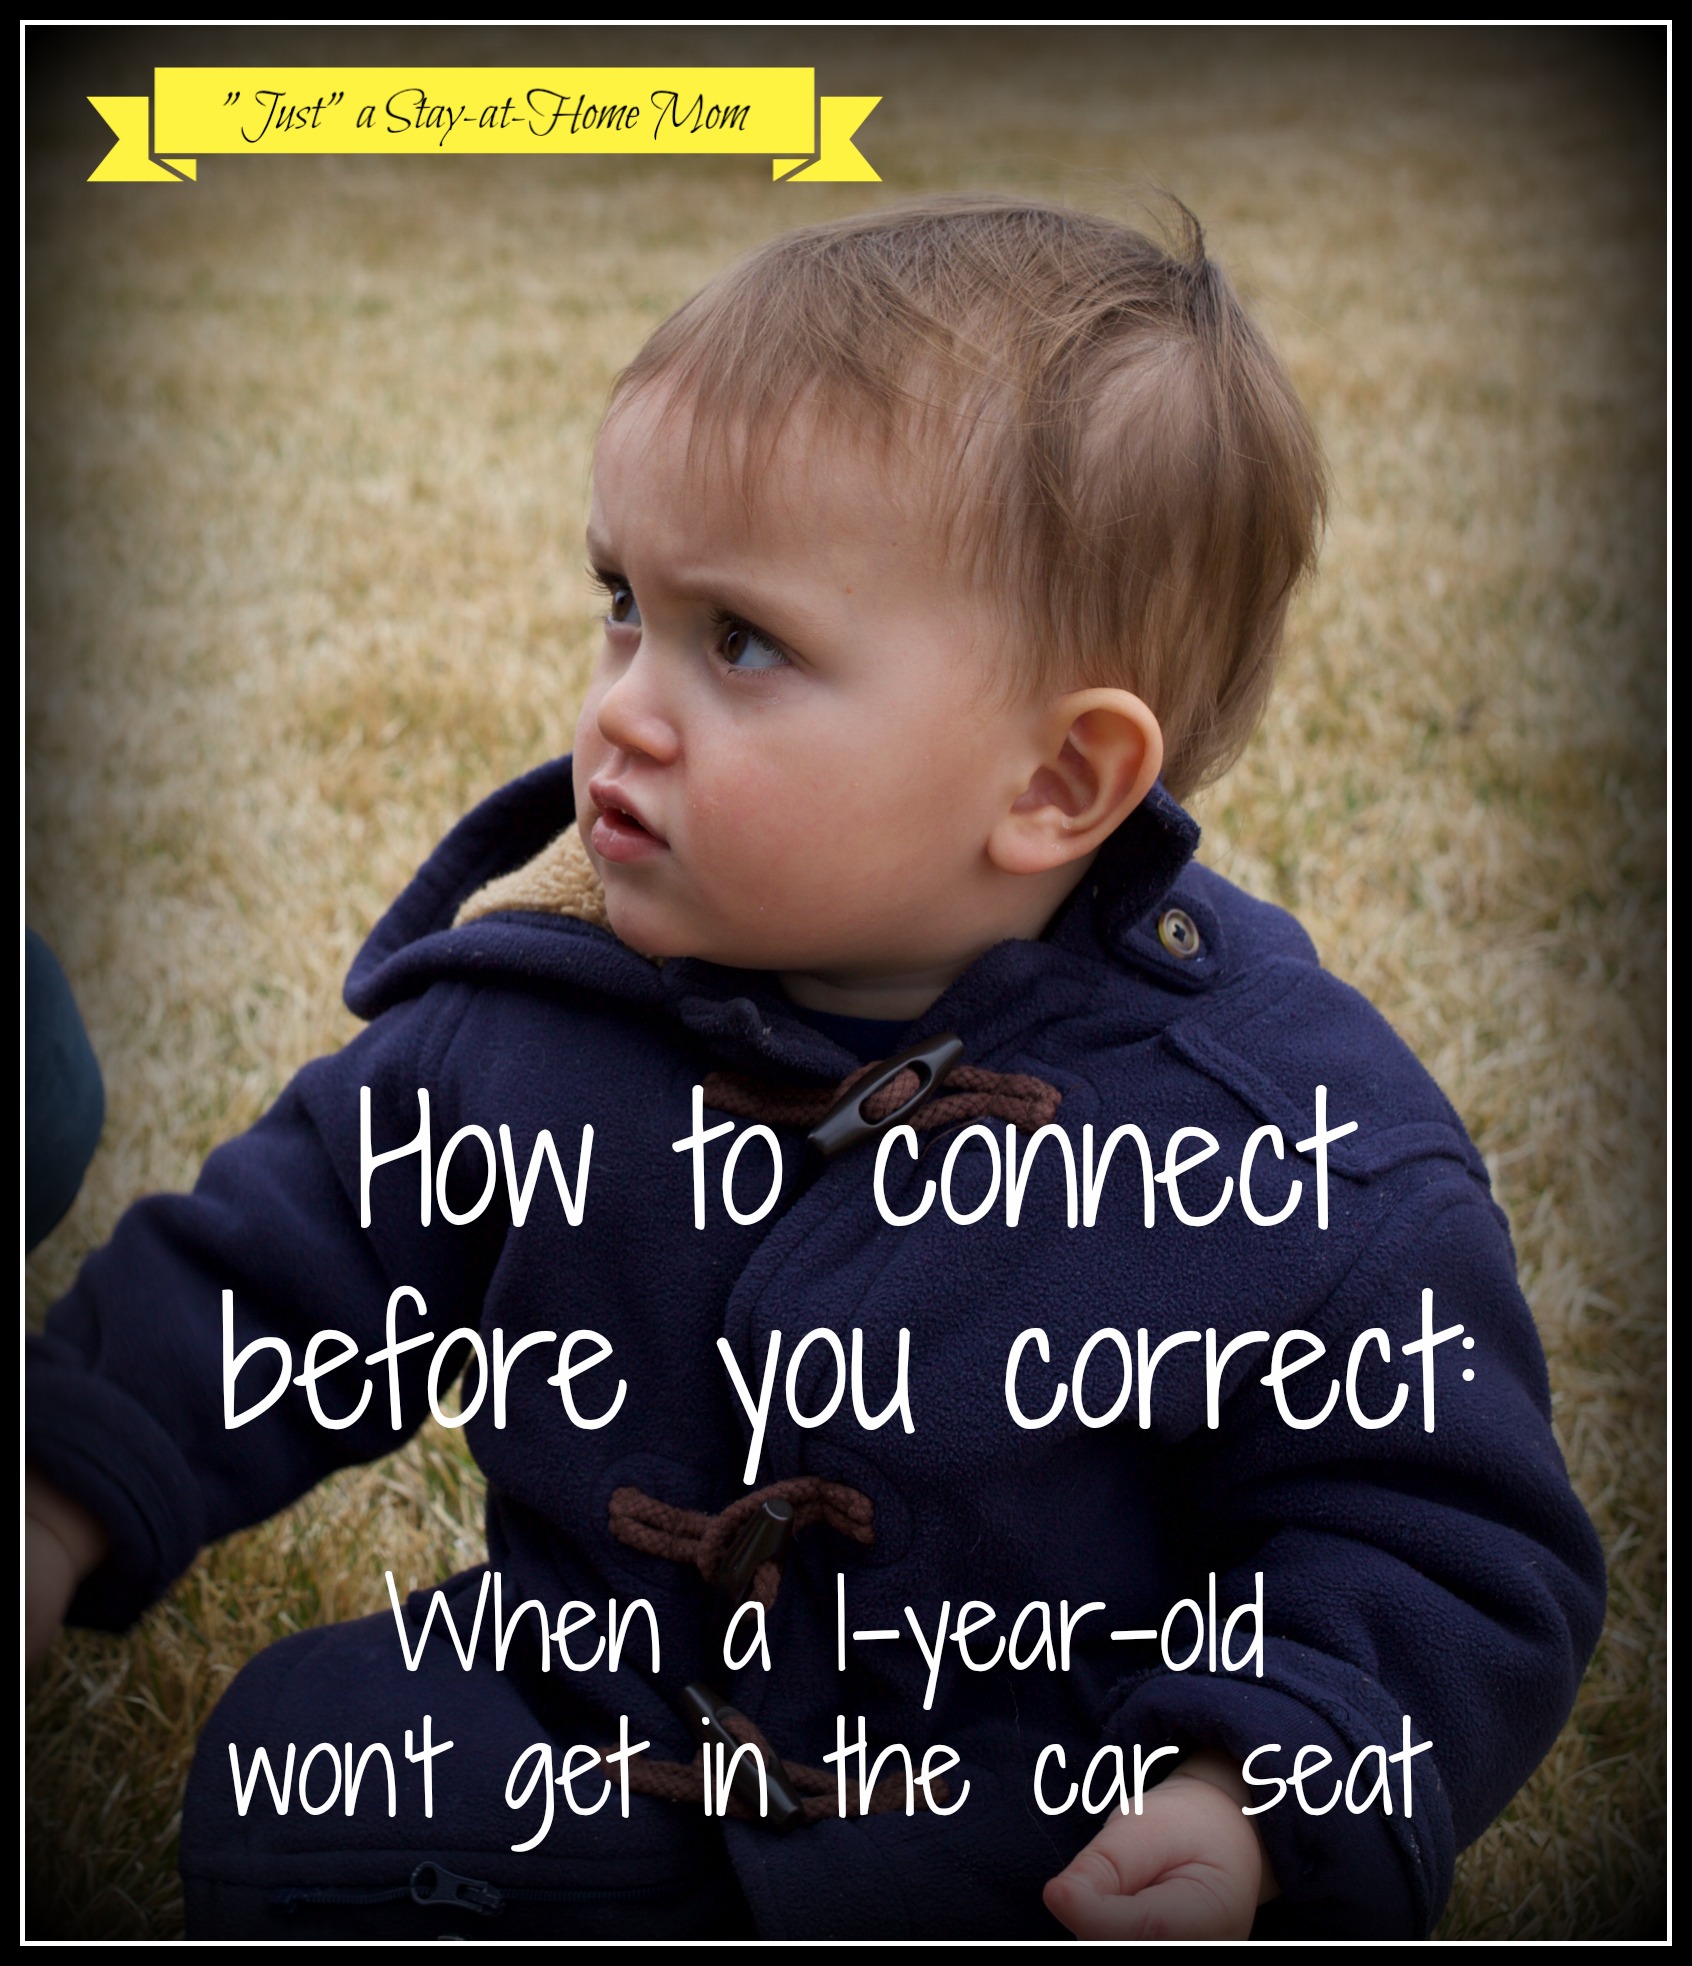 What to do when your 1-year-old won’t get in the car seat